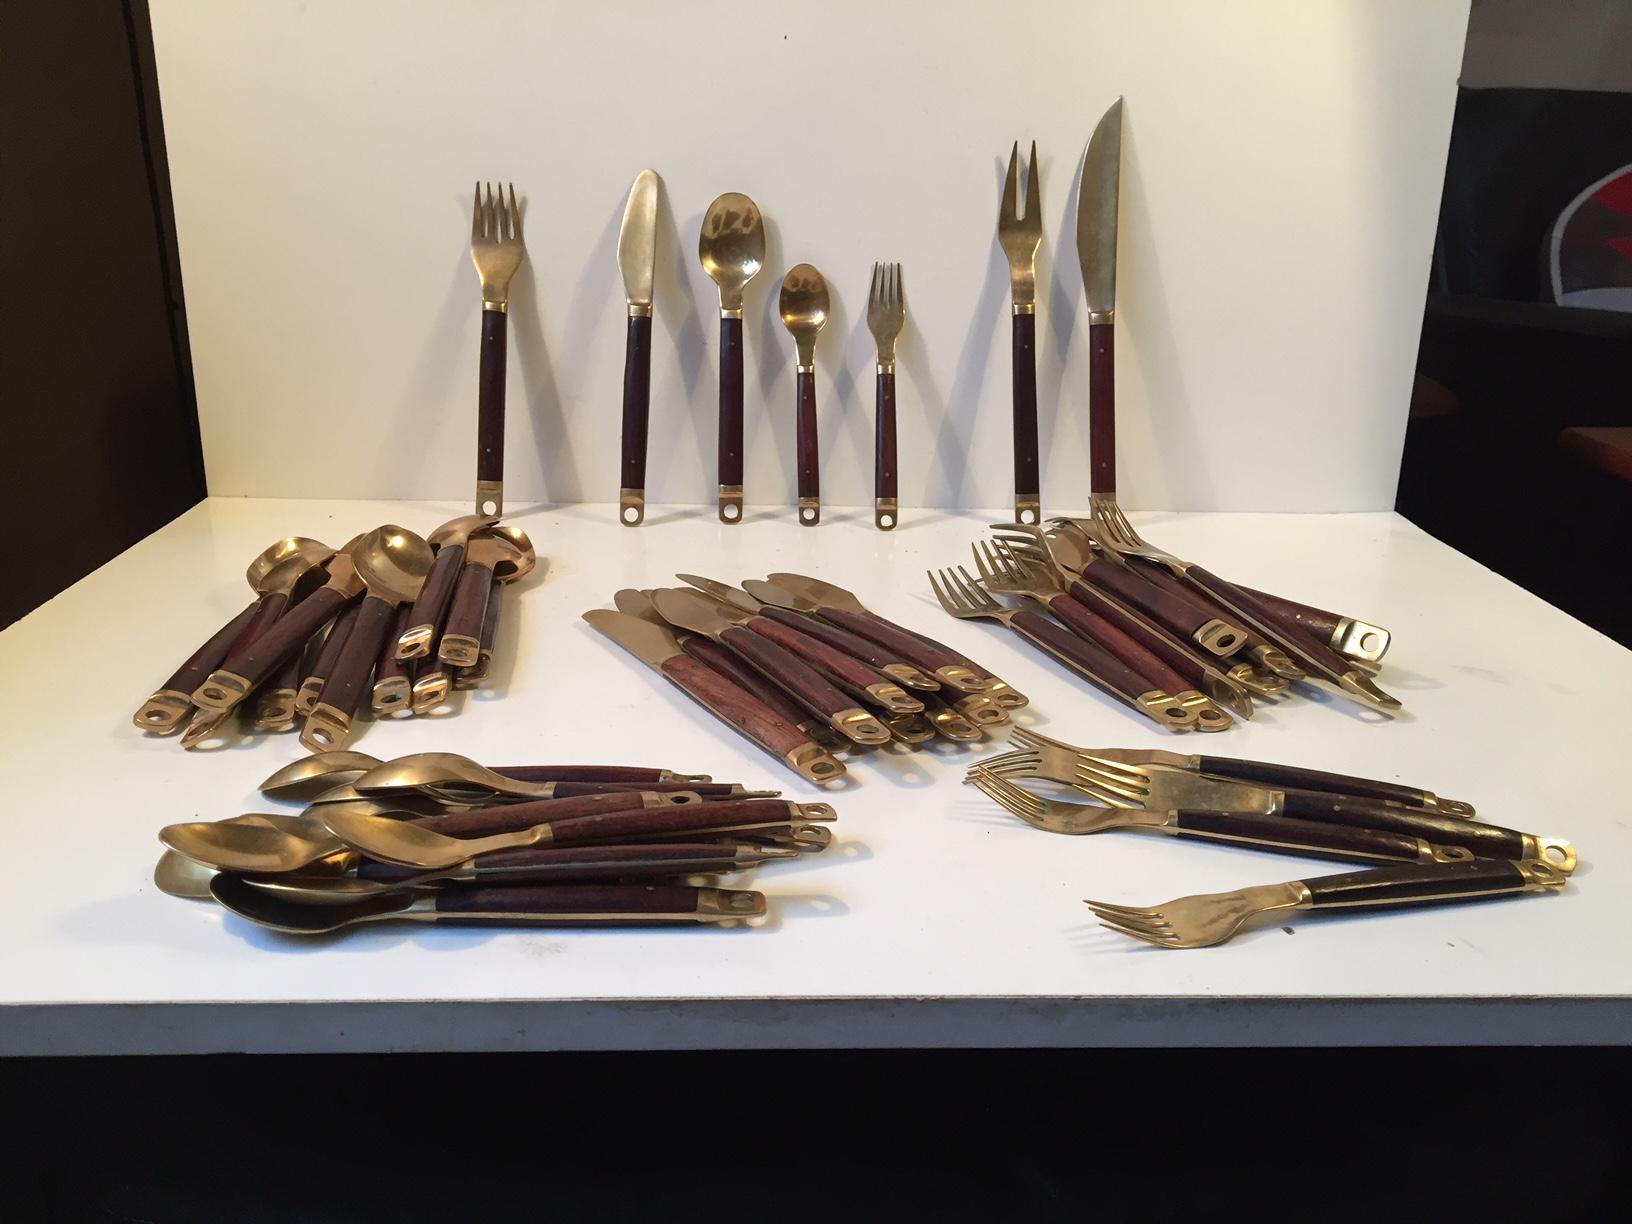 This dining/lunch set by Carl Cohr was manufactured and designed in Denmark in the 1960s. The set consists of 3 x 12 dinner/lunch, knives, forks and soup spoons, 11 tea spoons, 6 dessert/topping forks and a roast carving set. A rather practical